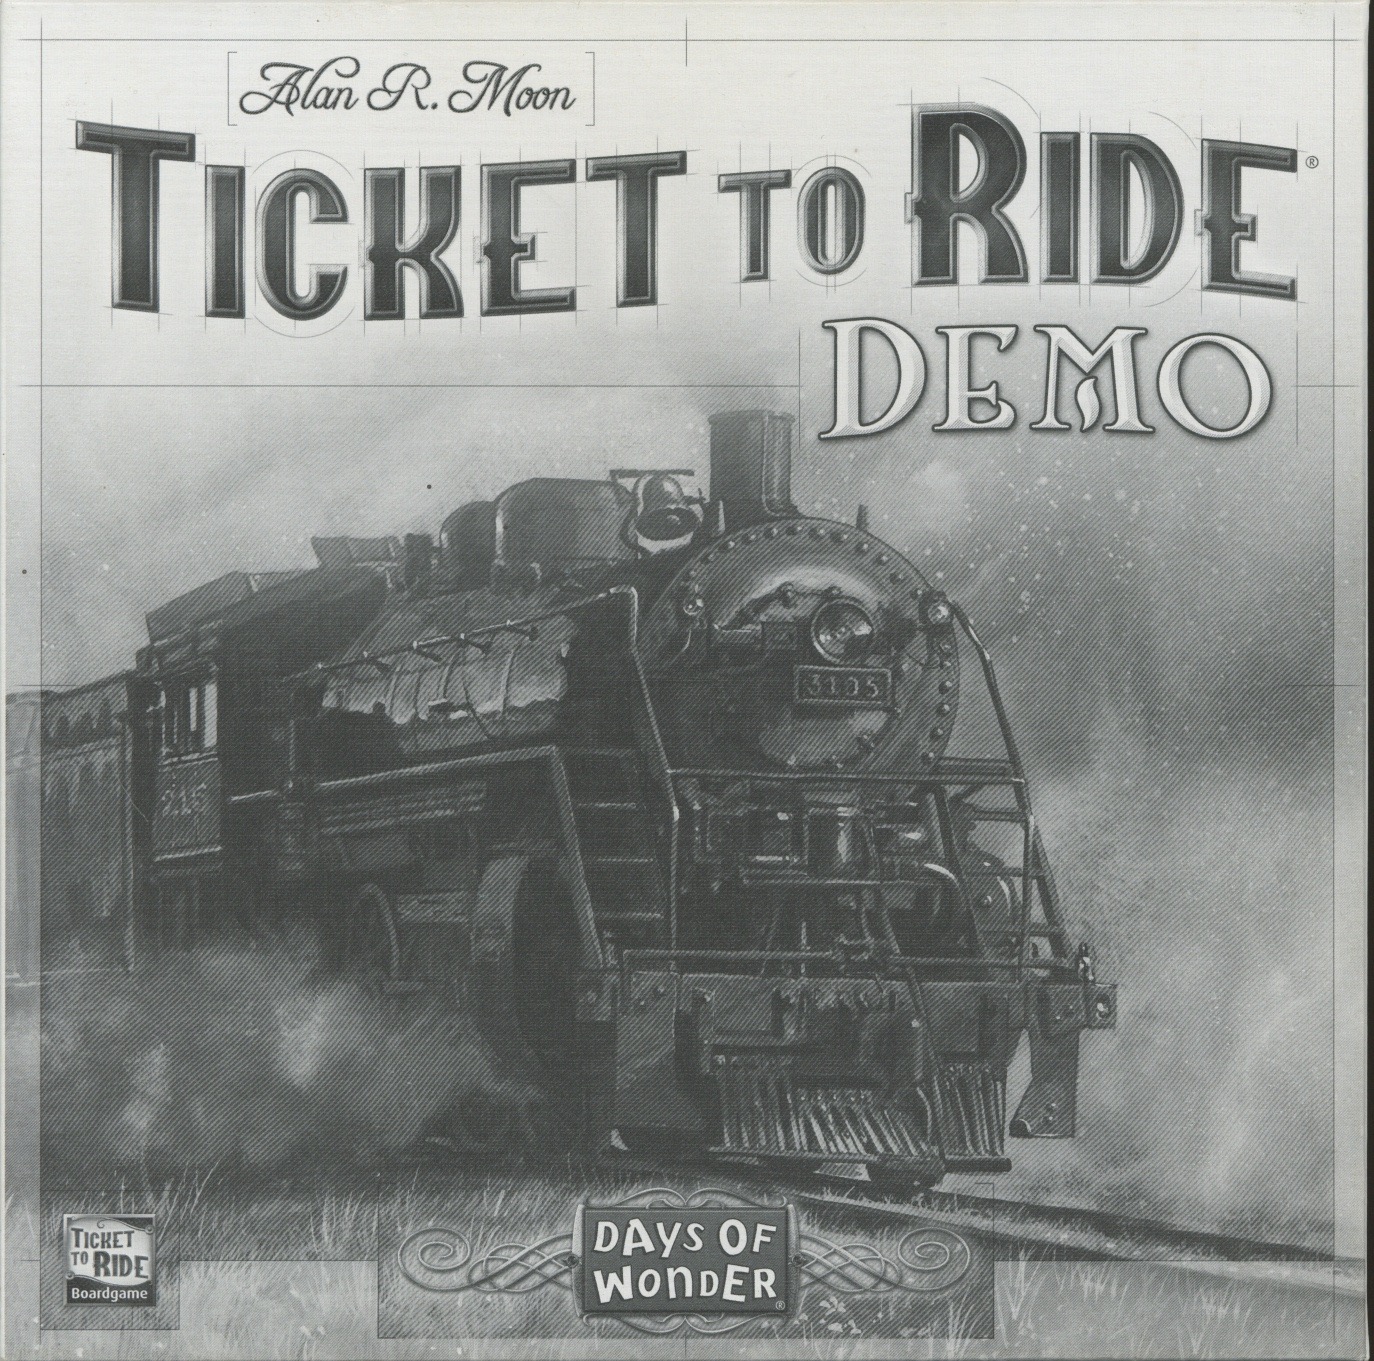 Ticket to Ride: Demo